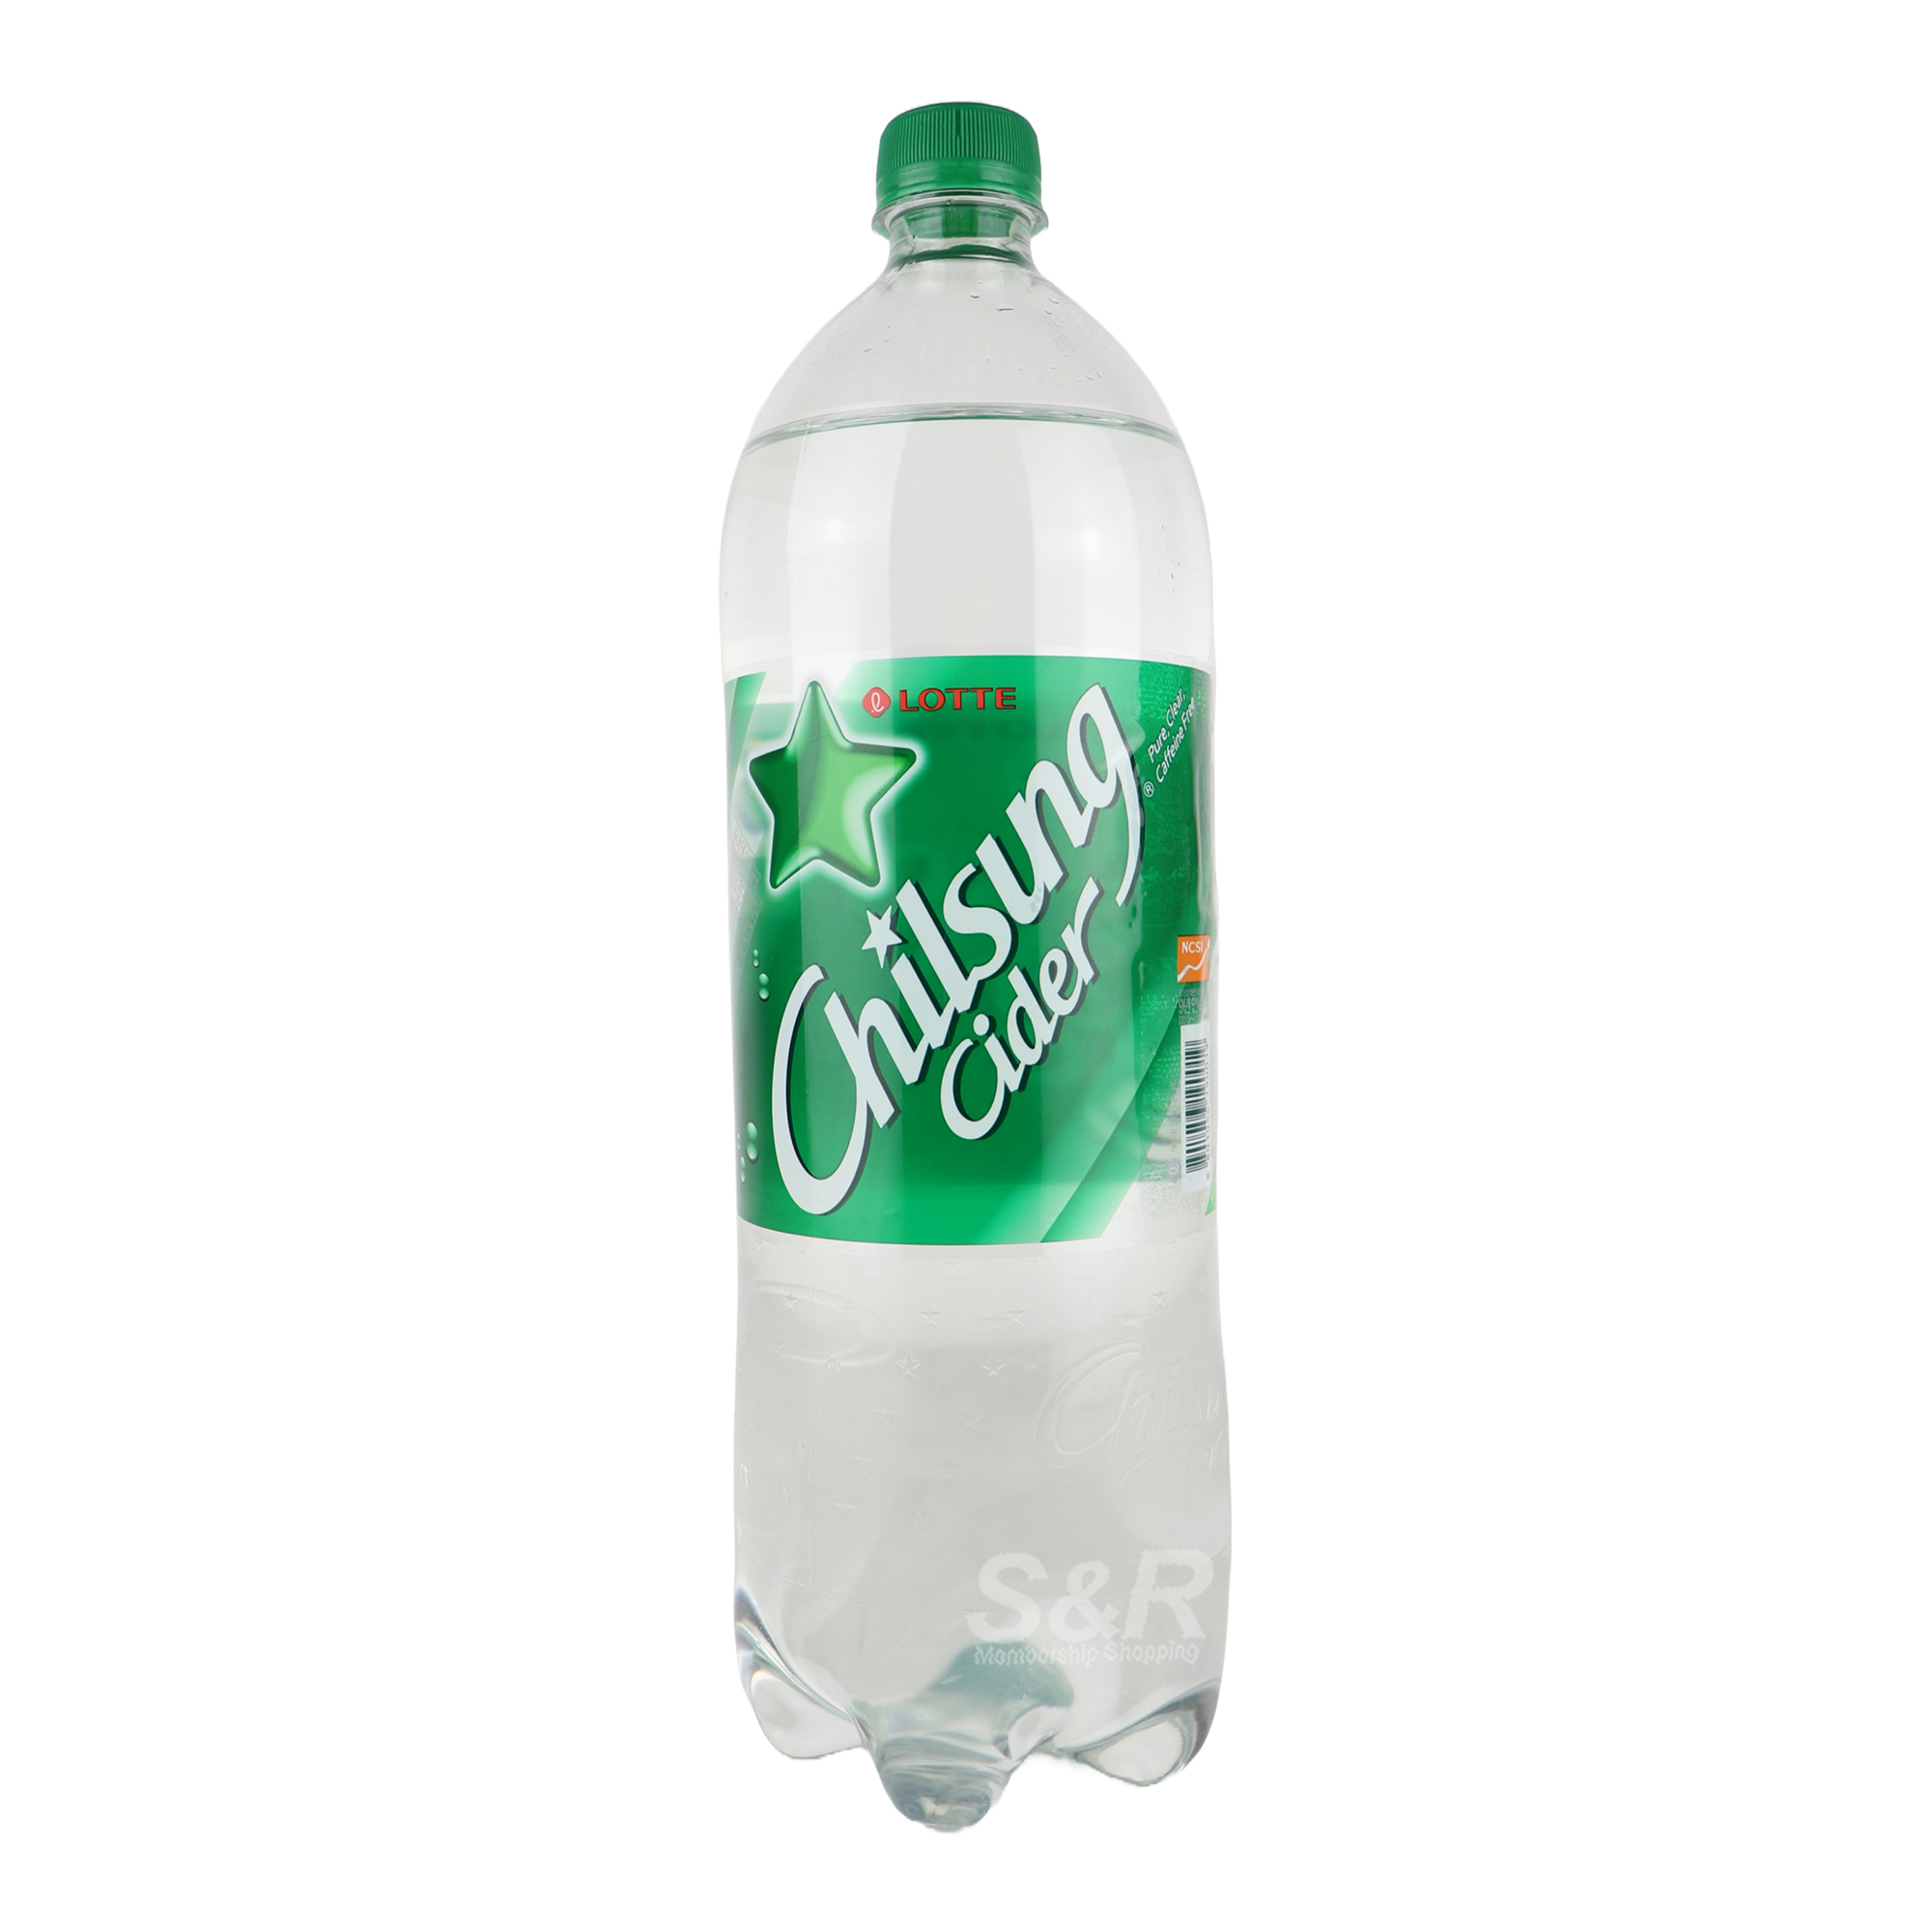 Lotte Chilsung Cider Can Lemon Lime 1.5L